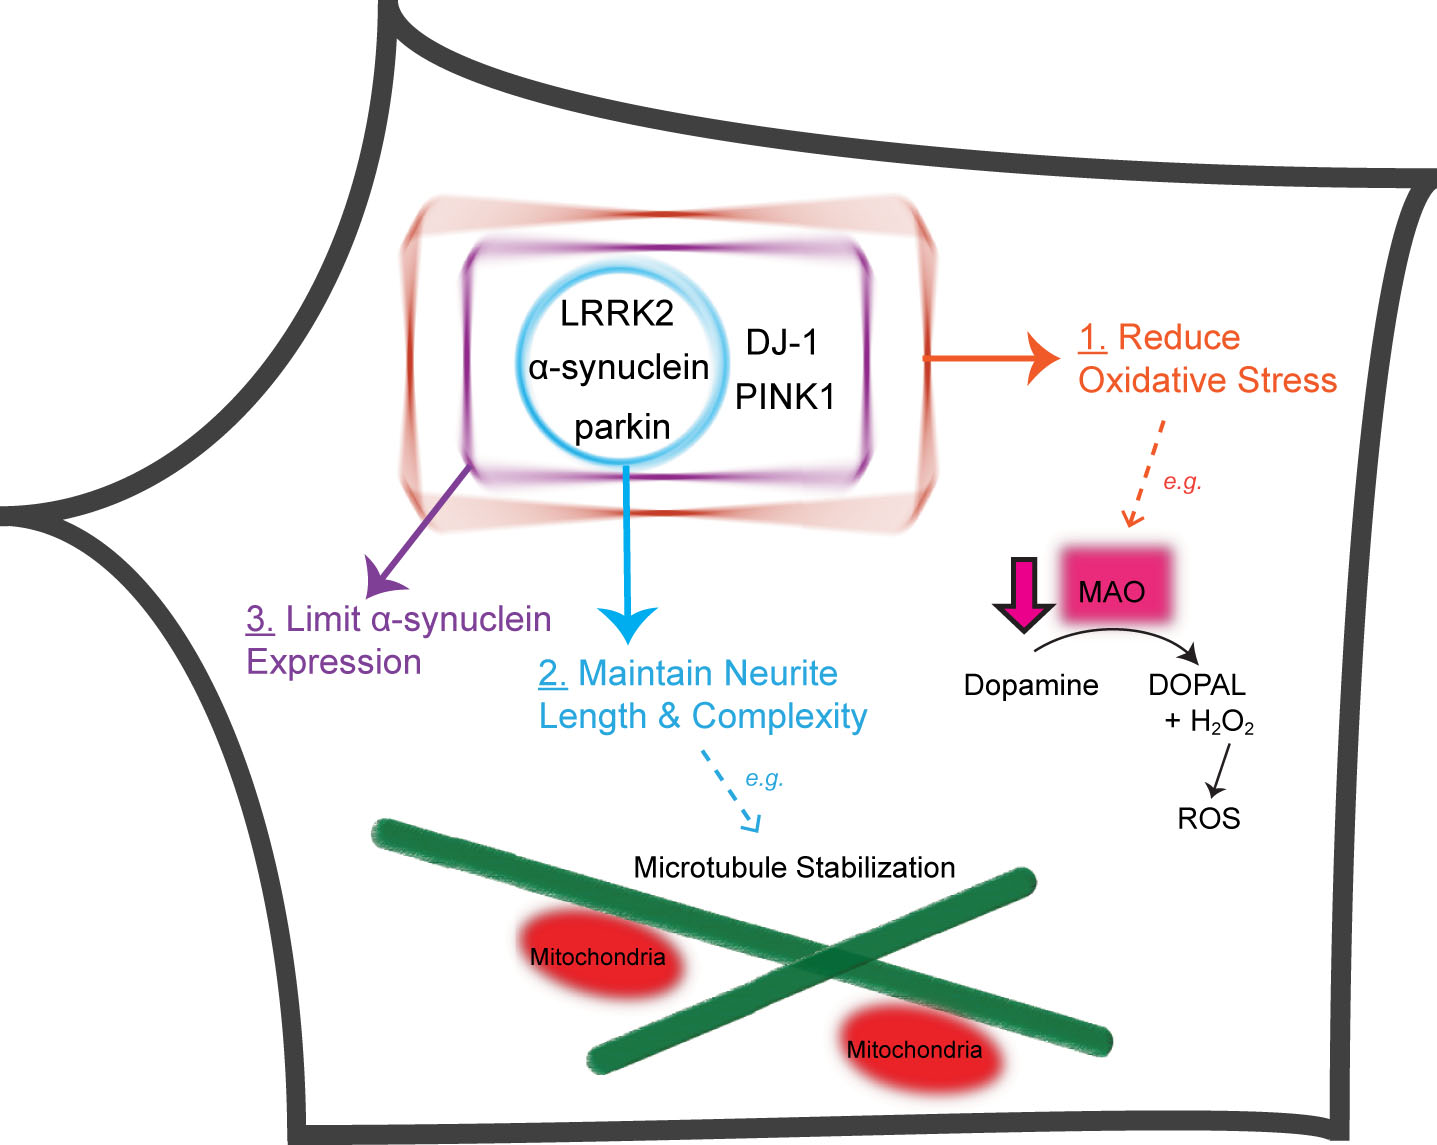 Five PD-linked genes converge on three pathways to protect against vulnerabilities of nigral DA neurons. Proteins encoded by five PD-linked genes (α-synuclein, LRRK2, parkin, PINK1 and DJ-1) limit oxidative stress stemming from dopamine metabolism and mitochondrial dysfunction (Pathway 1). α-synuclein, LRRK2 and parkin maintain the length and complexity of neuronal processes, e.g., through microtubule stabilization (Pathway 2). DJ-1, PINK1, α-synuclein, LRRK2 and parkin normally function to prevent the accumulation of α-synuclein (Pathway 3). DOPAL, 3,4-Dihydroxyphenylacetaldehyde; H2O2, hydrogen peroxide.